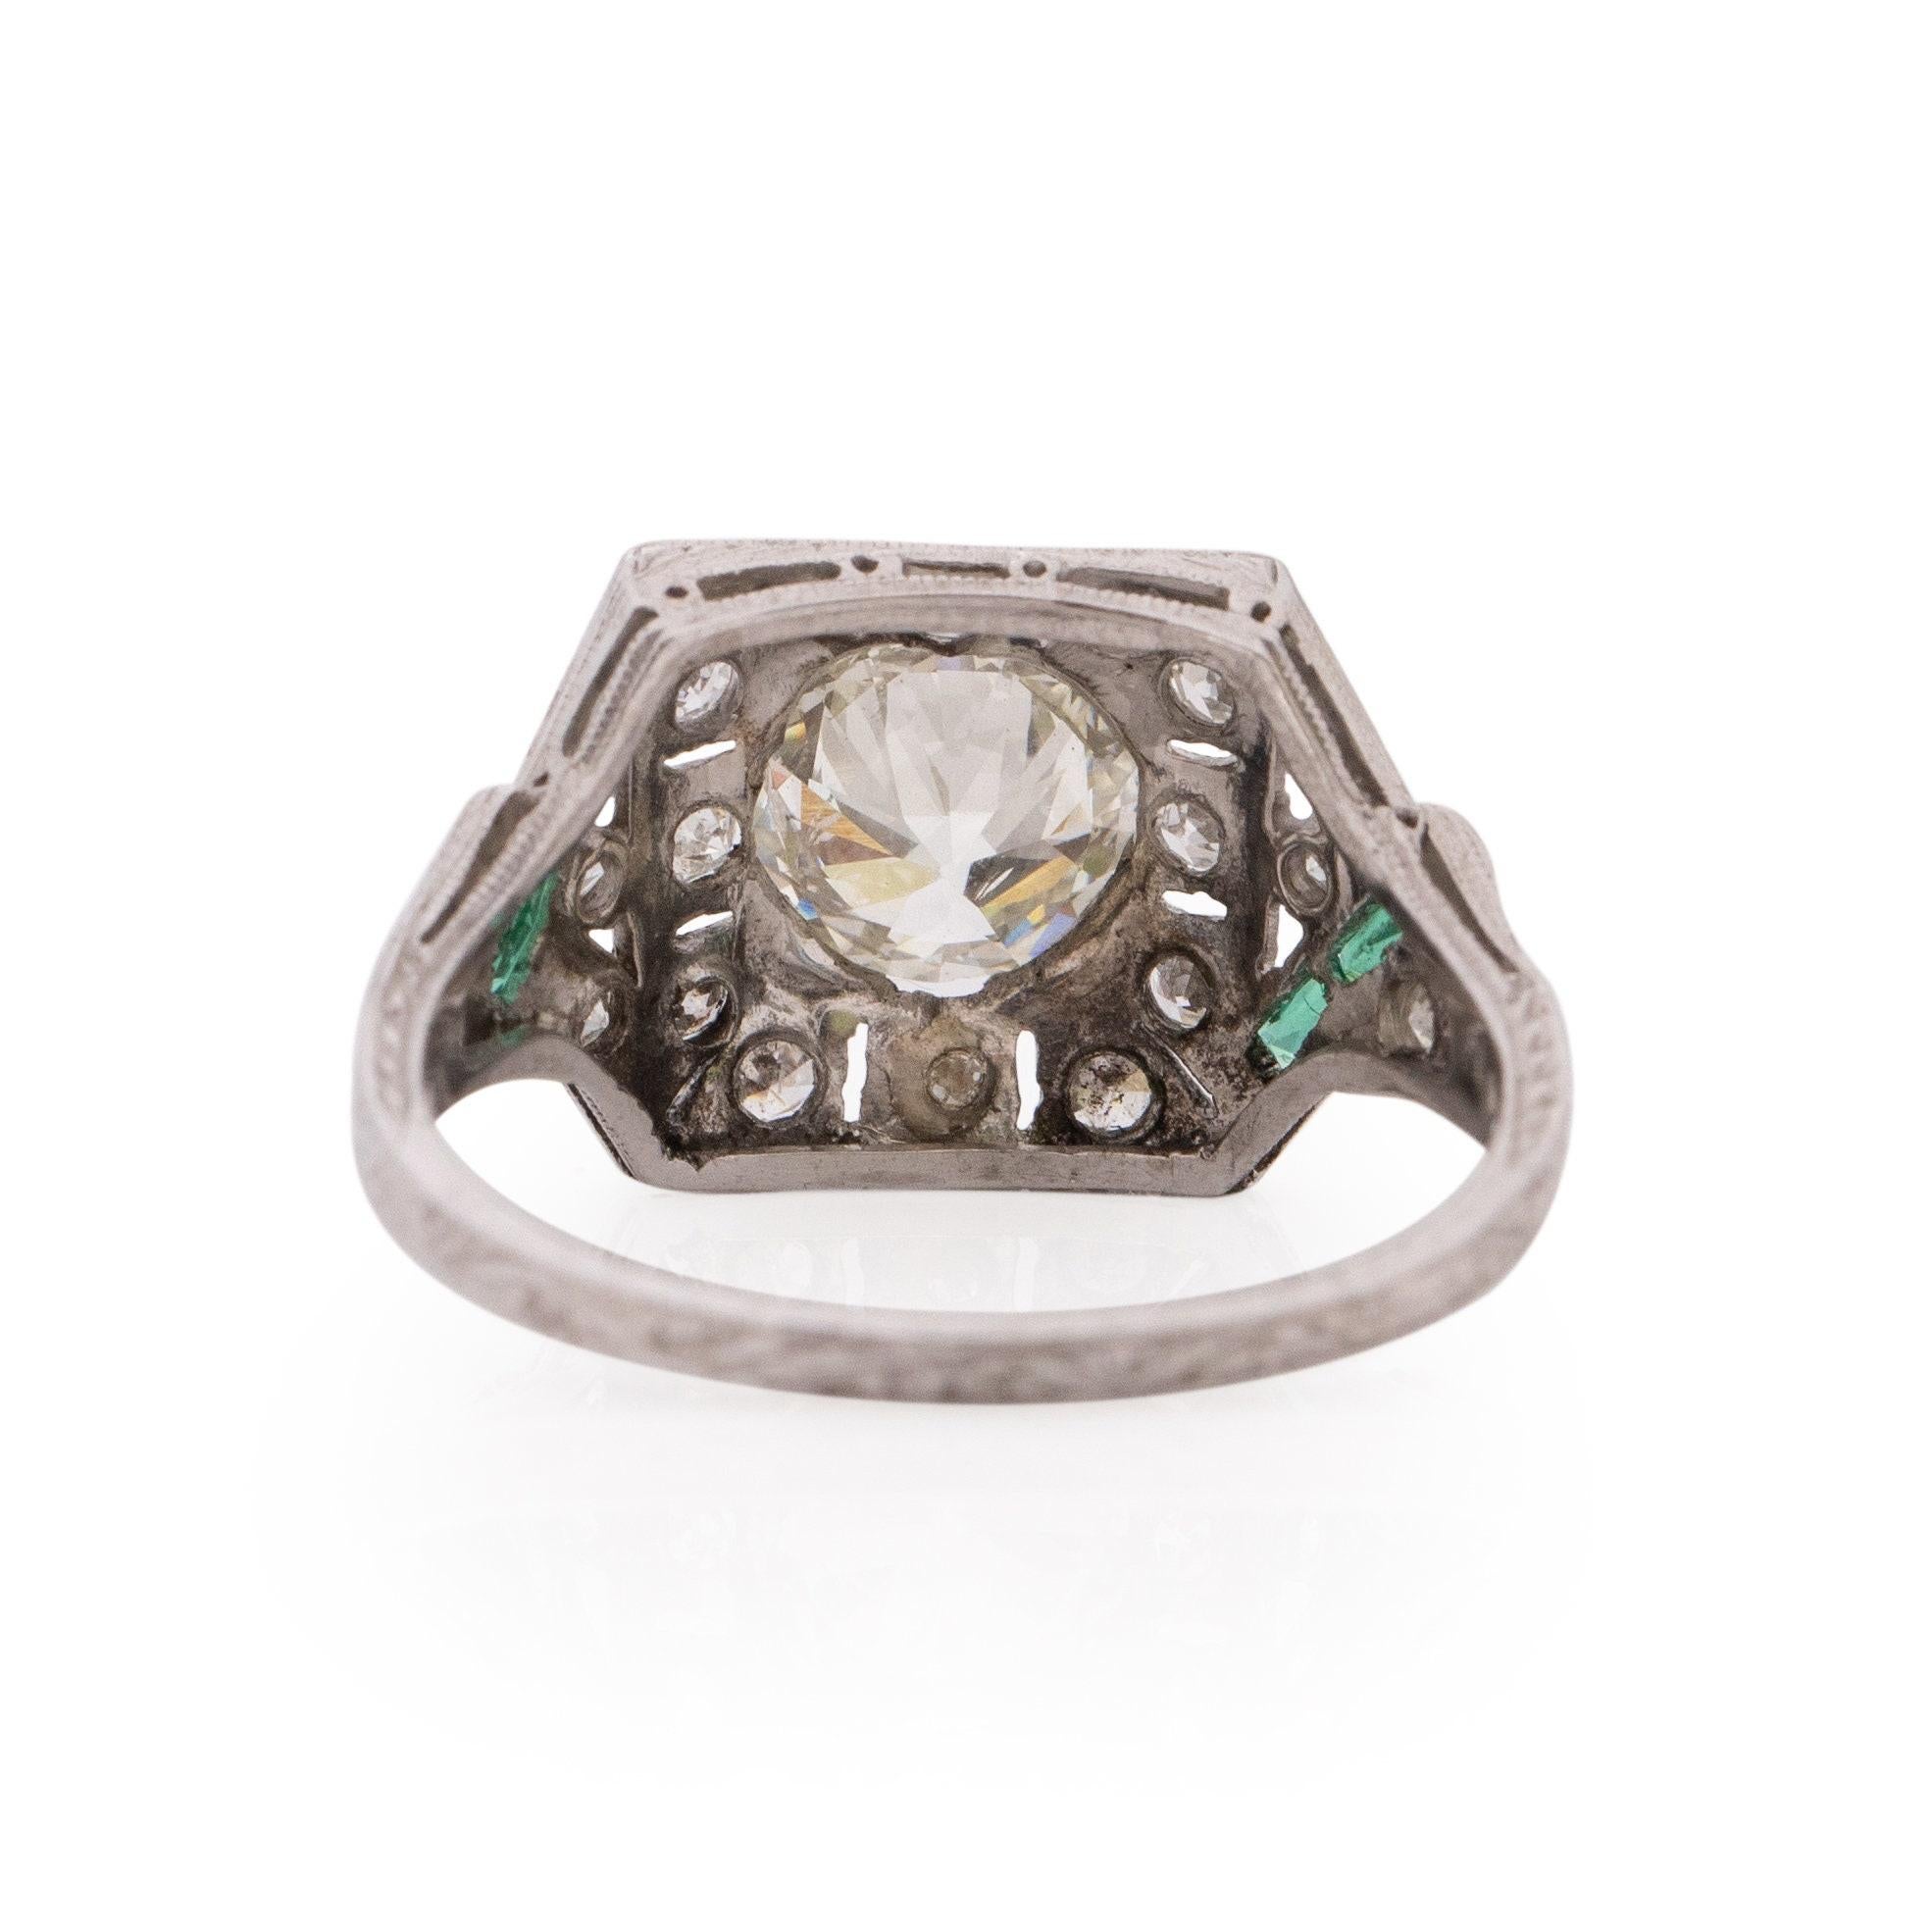 Circa 1920's Art Deco Platinum 1.26 Ct GIA Certified Diamond and Emerald Ring In Good Condition For Sale In Addison, TX